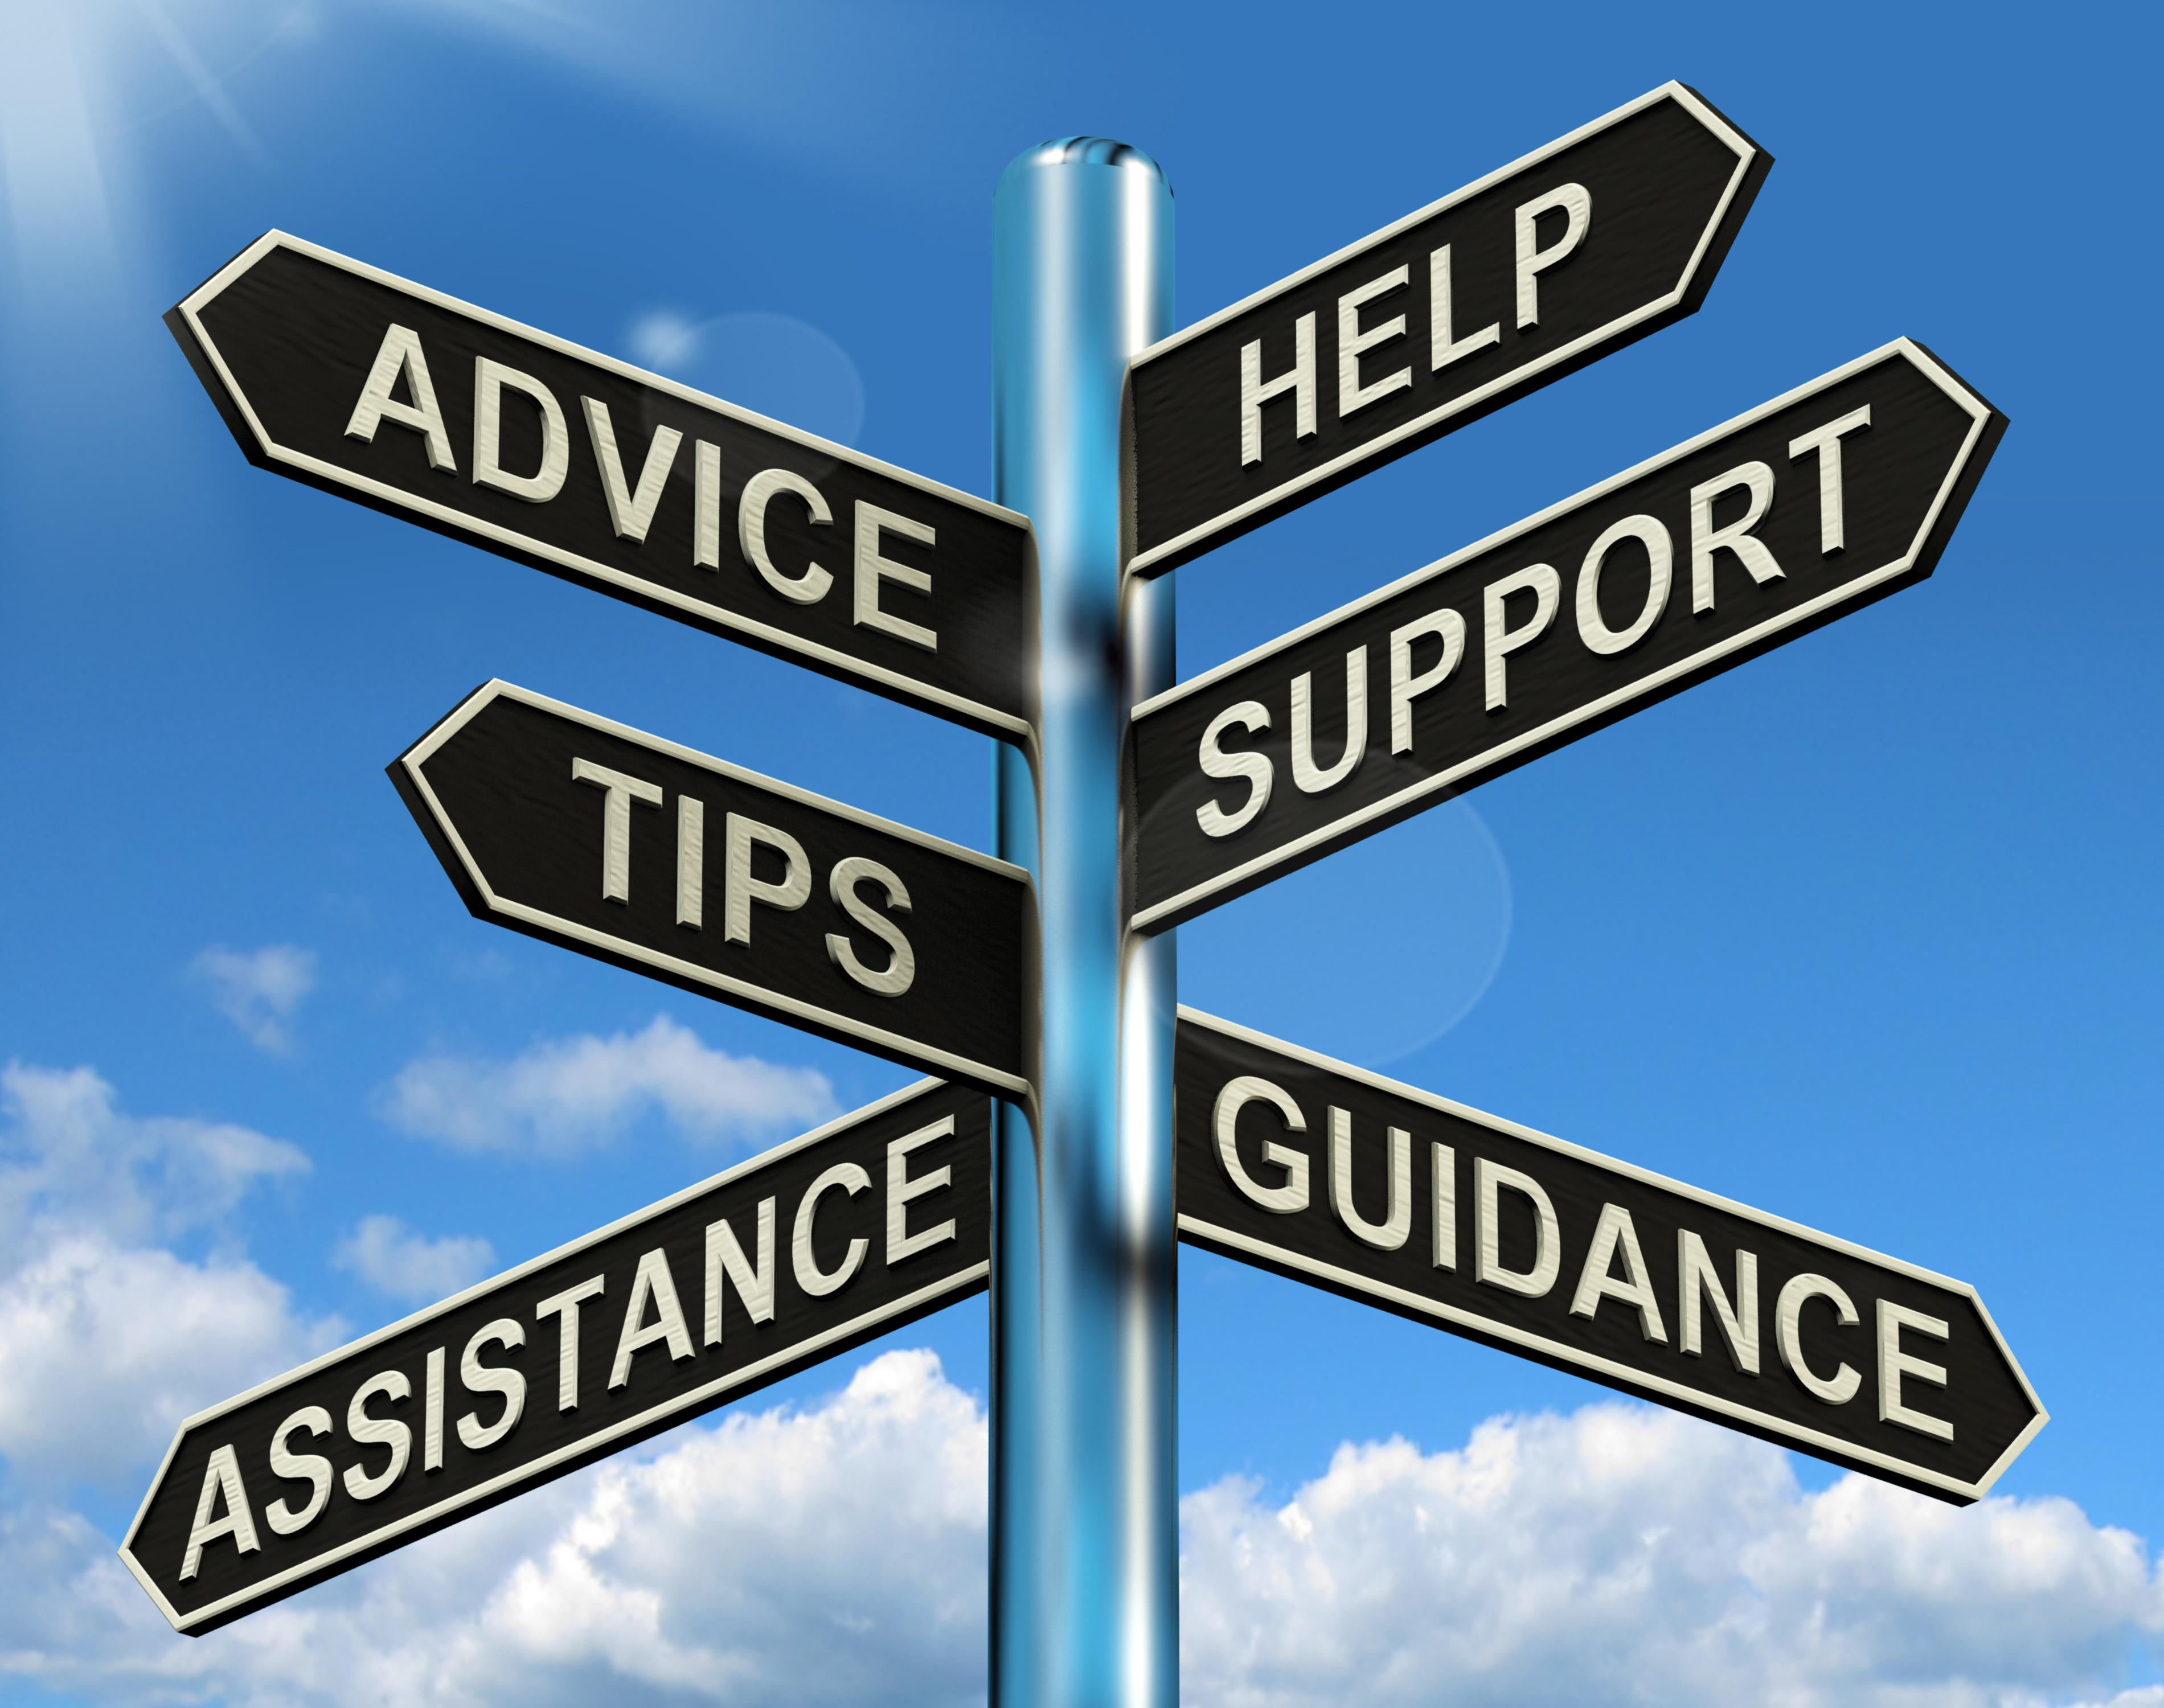 Support, help, advice, tips, assistance, guidance